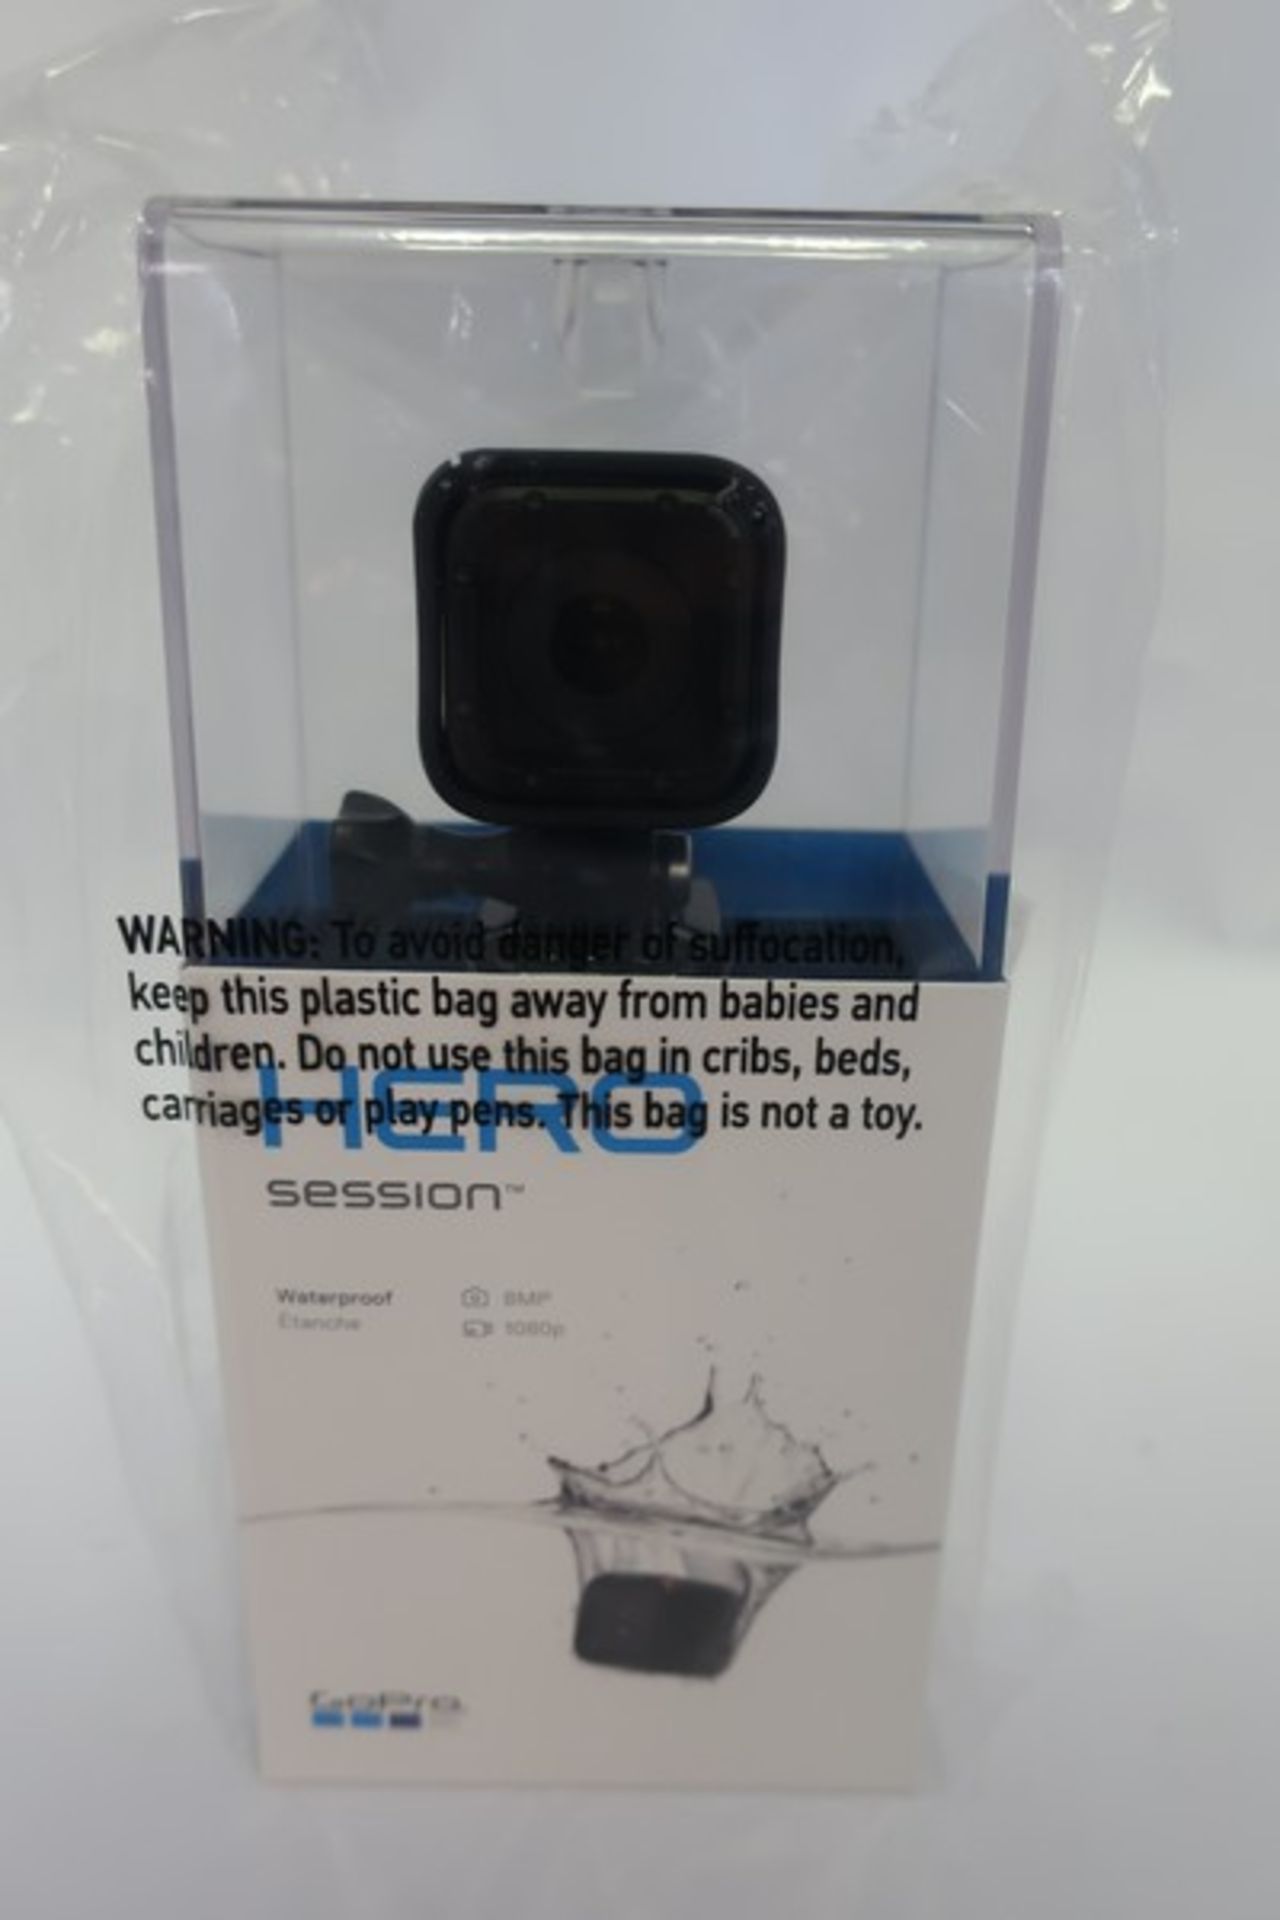 A boxed as new GoPro HERO Session 1080p HD waterproof action camera in black (Packaging sealed).